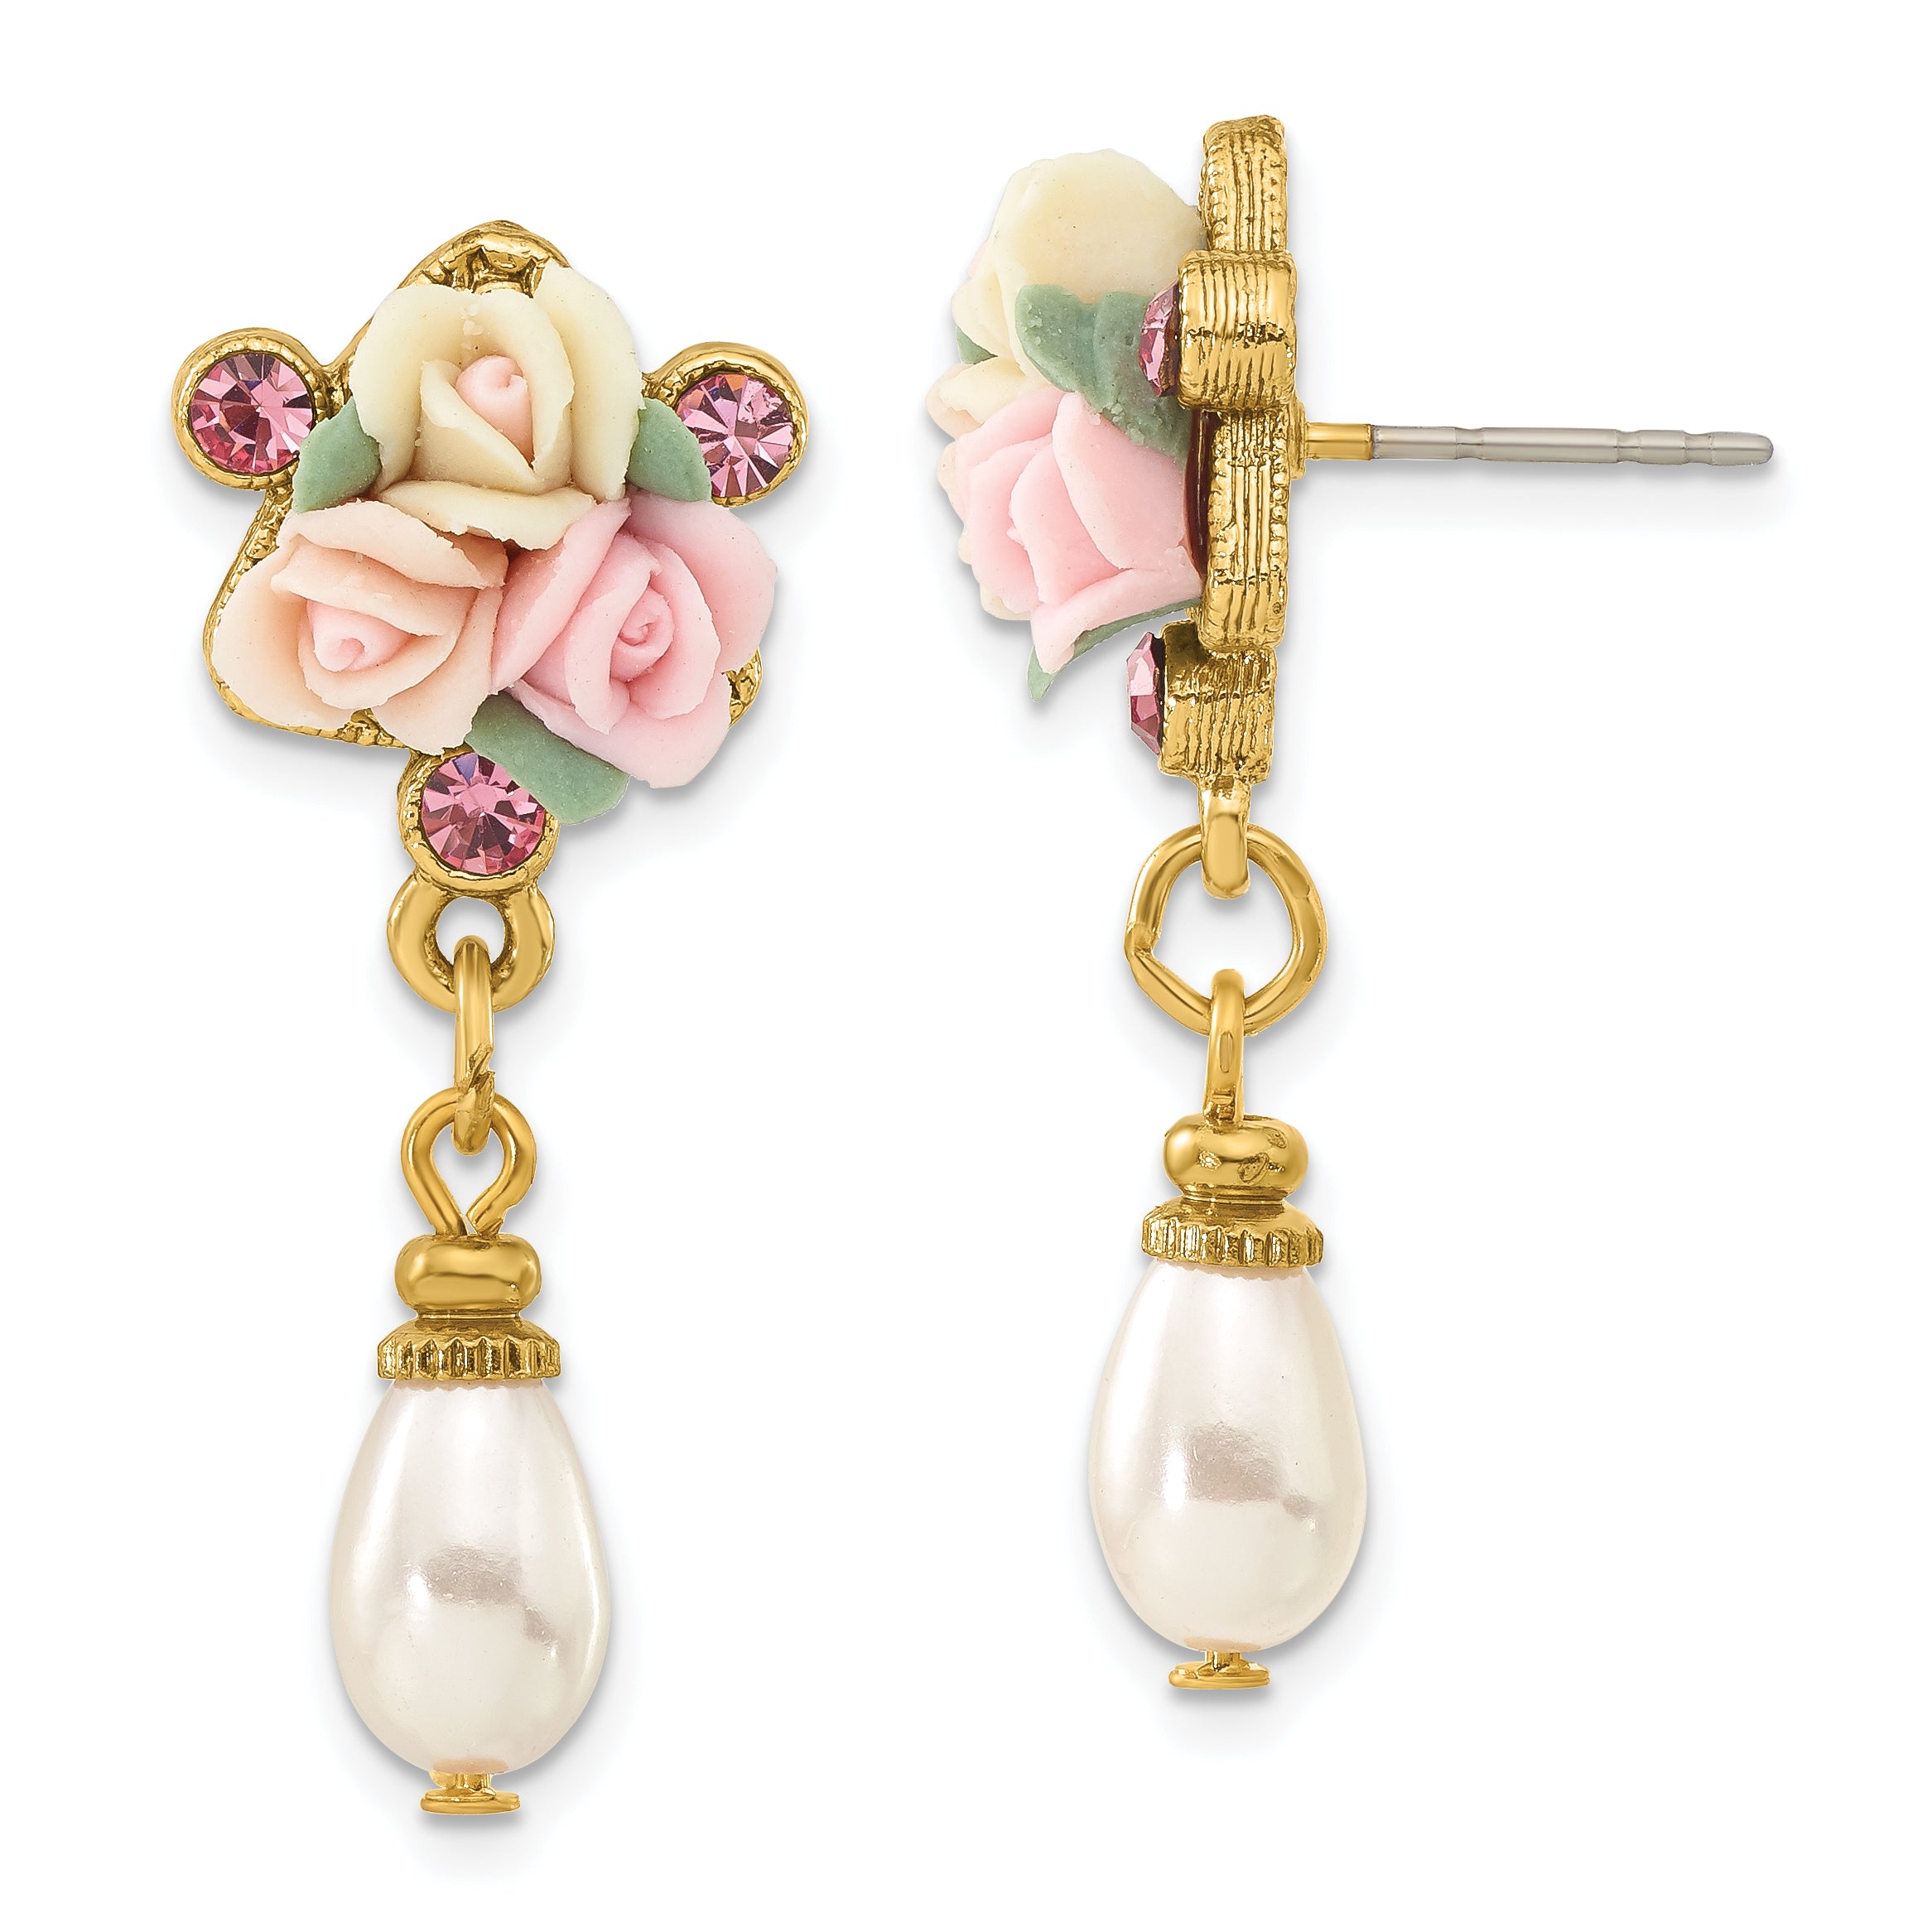 1928 Jewelry Gold-tone Pink Crystal Ivory Peach and Pink Porcelain Rose Flower Bouquet and Imitation Pearl Dangle Post Earrings